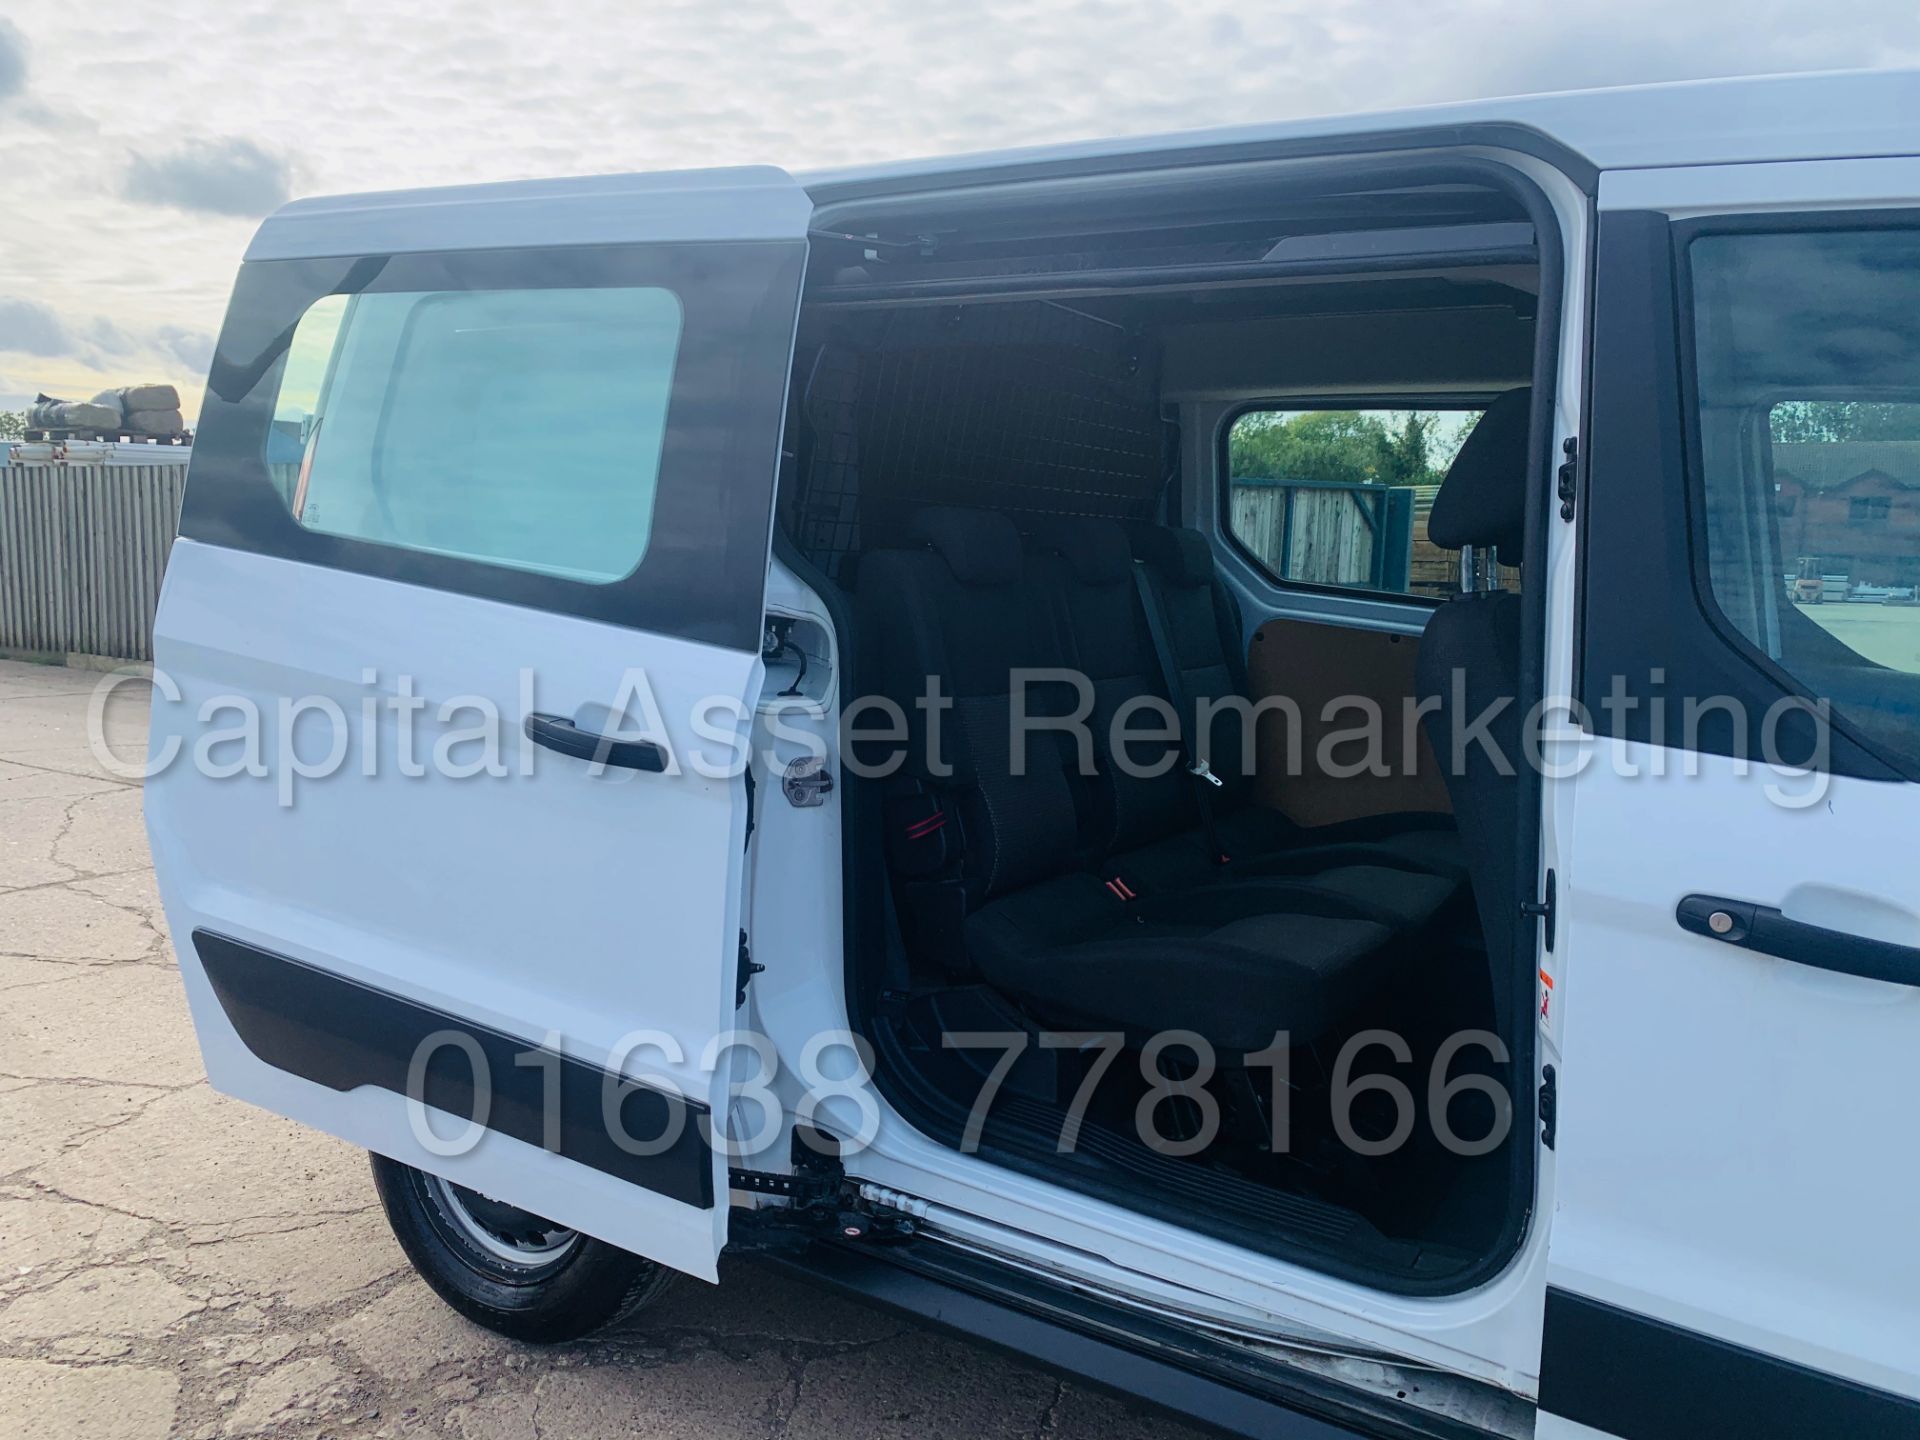 (ON SALE) FORD TRANSIT CONNECT *LWB- 5 SEATER CREW VAN* (2018 - EURO 6) 1.5 TDCI *AIR CON* (1 OWNER) - Image 24 of 40